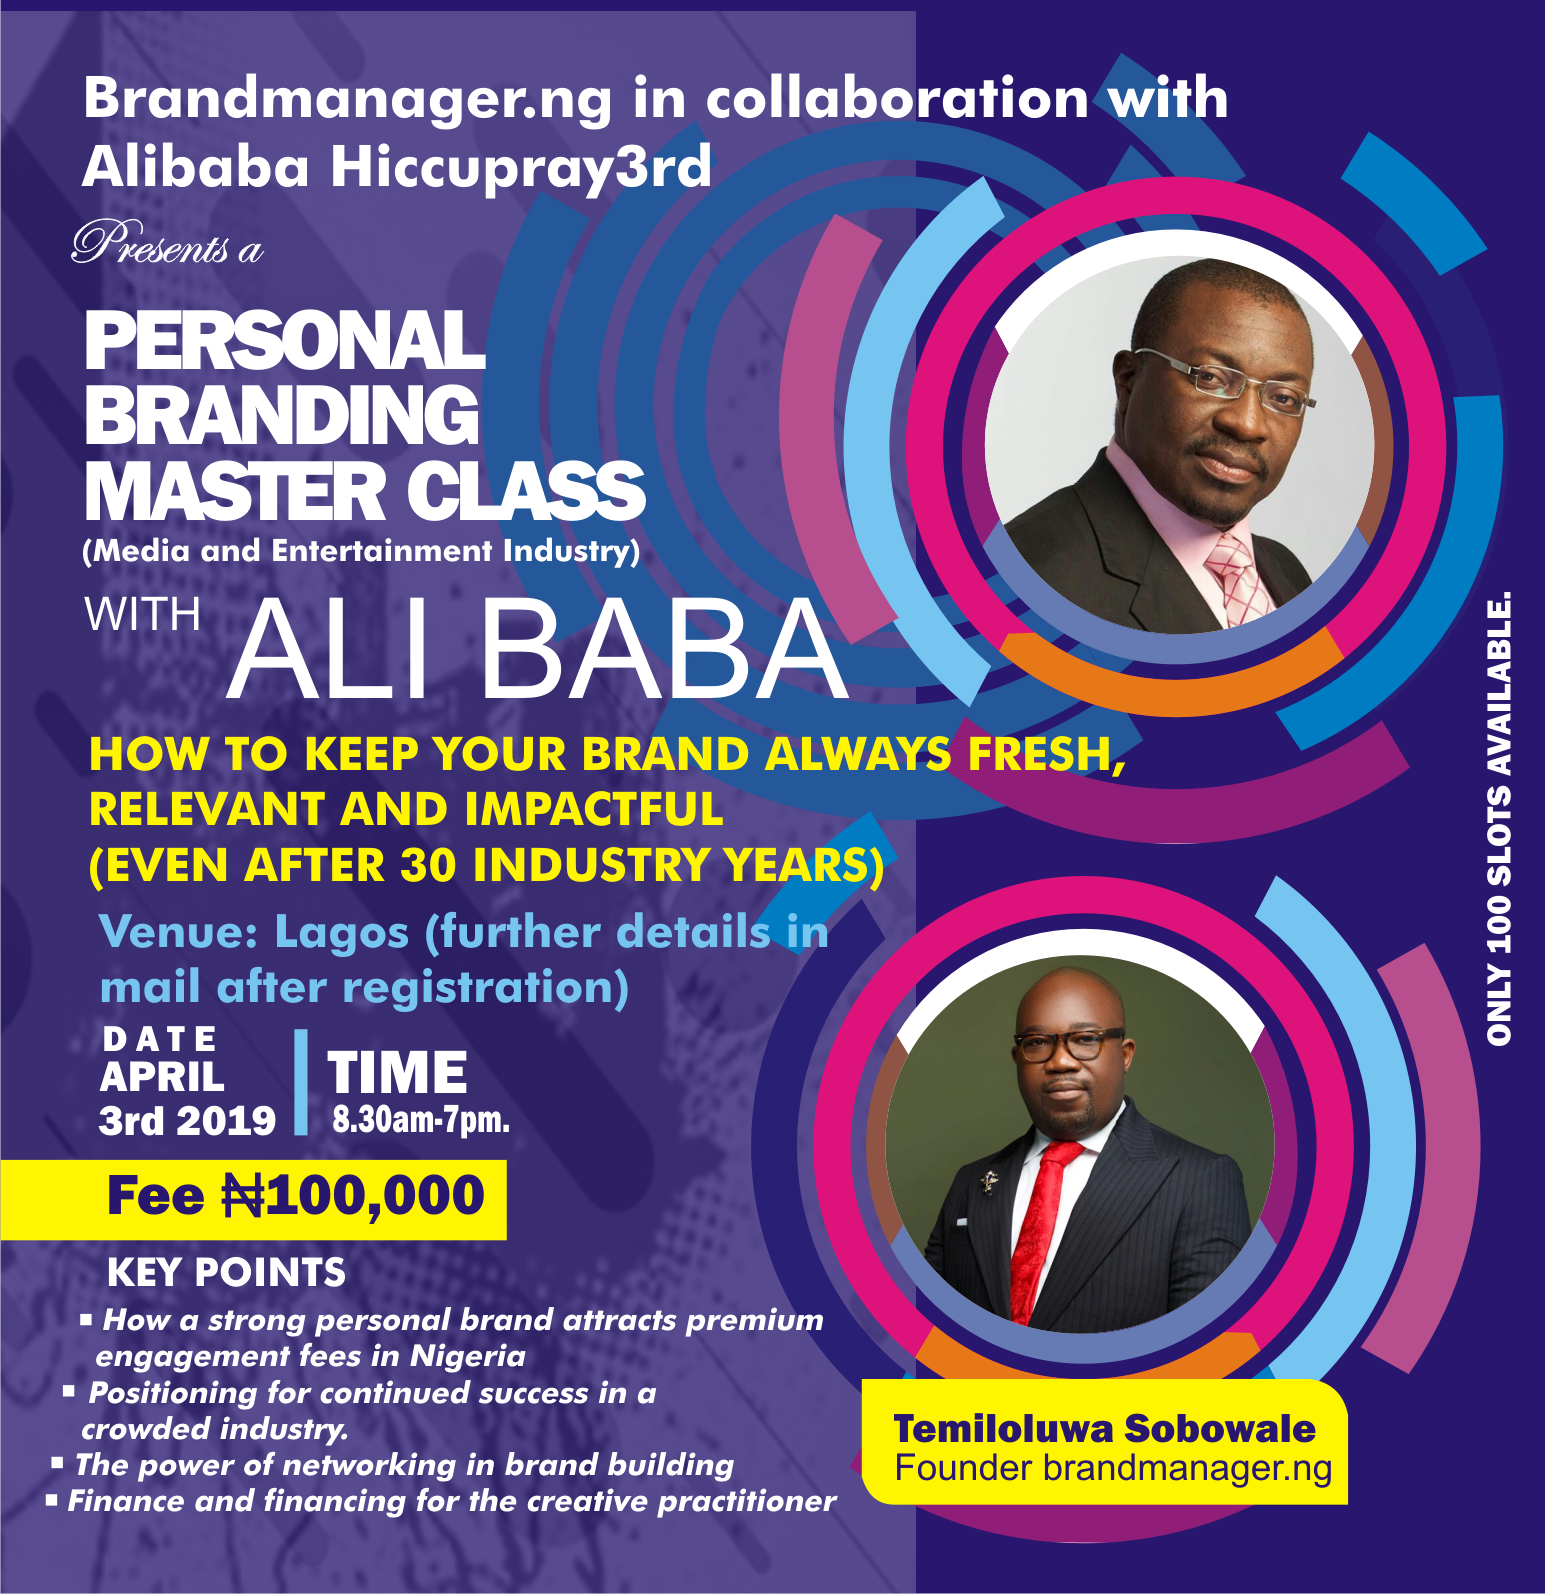 Ali Baba Set to Share Secrets of His Sustained 30 Years Industry Leadership at Personal Branding Masterclass April 3rd